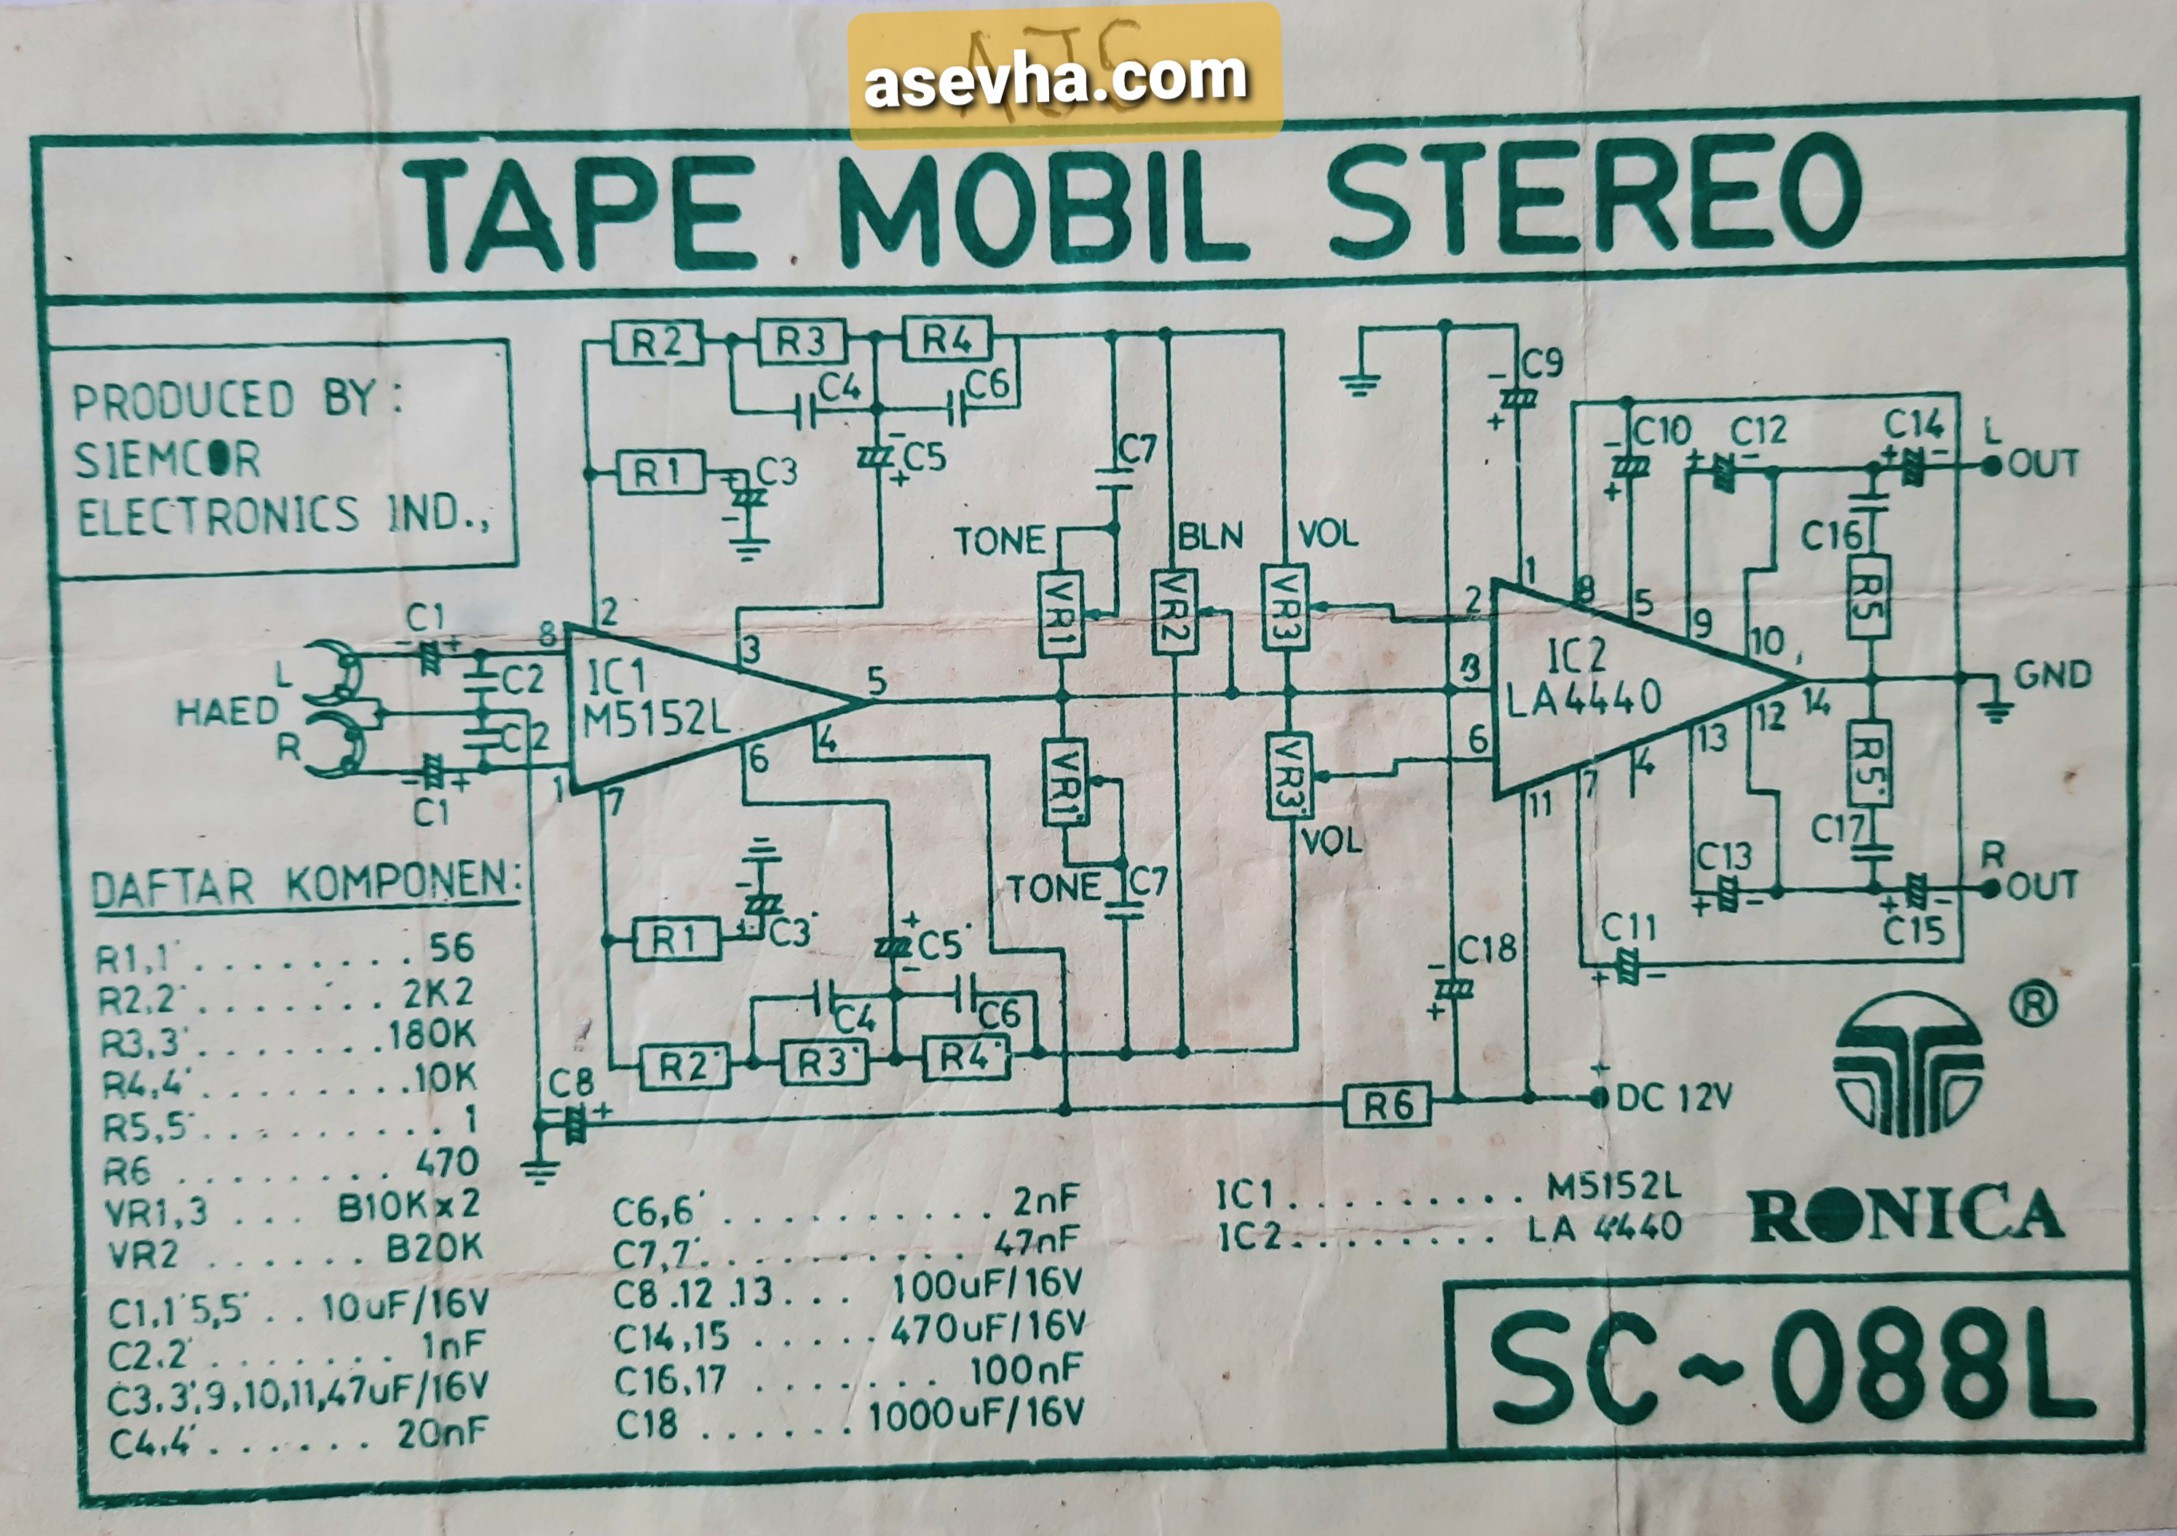 Skema Tape Mobil Stereo IC LA4440 by Ronica SC-088L